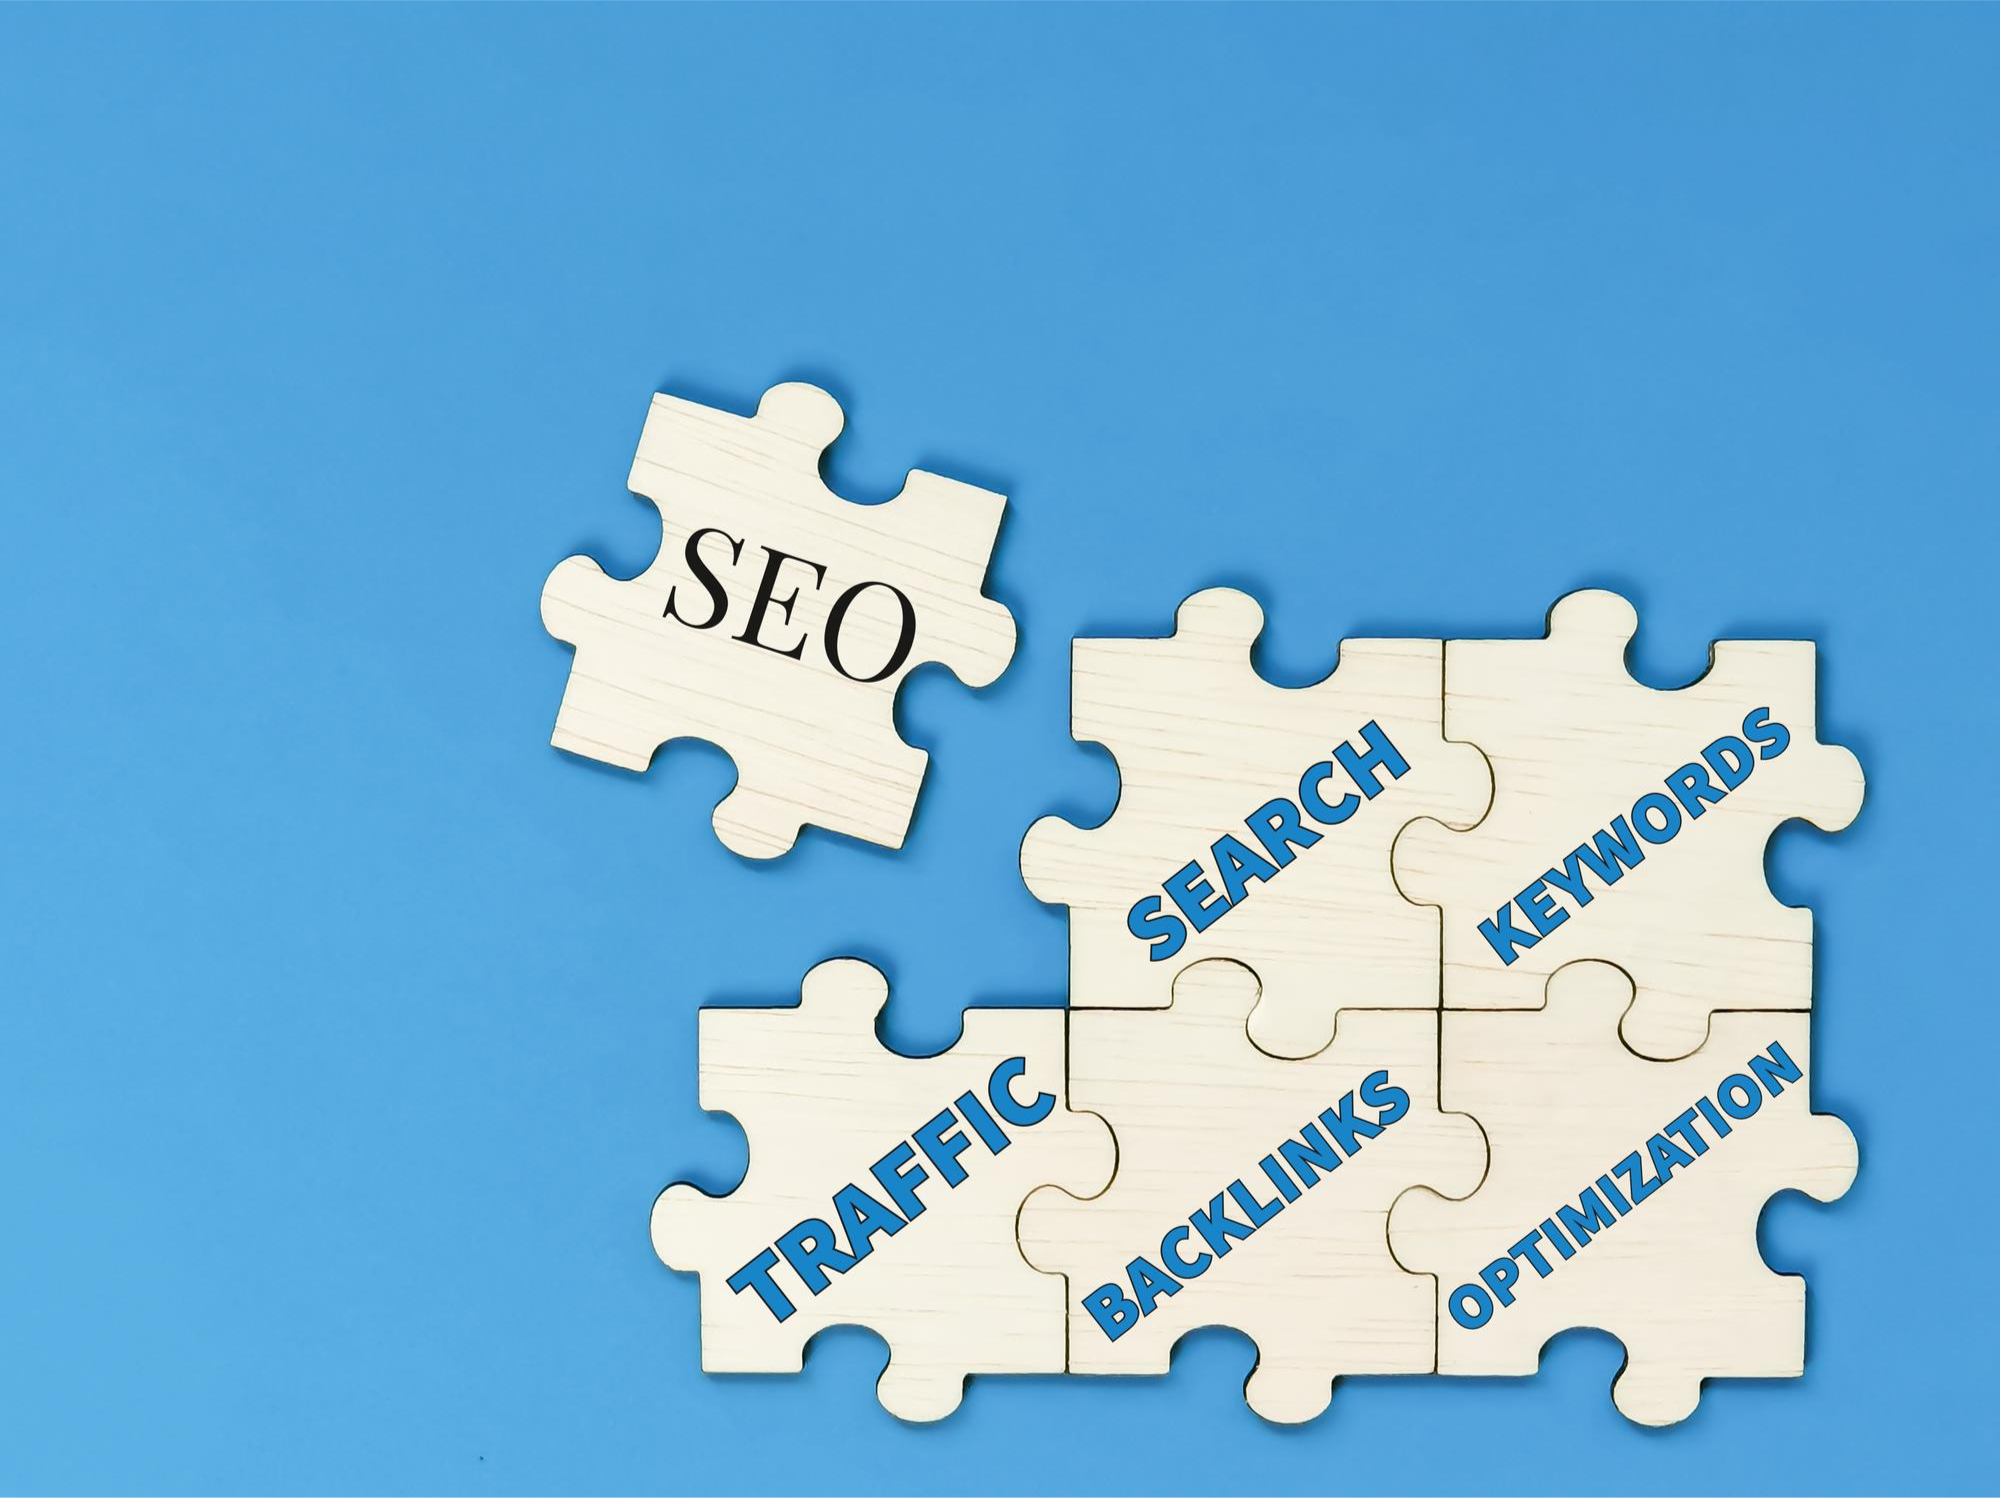 An image of S E O puzzle pieces fitting together: search, keywords, traffic, backlinks, and optimization